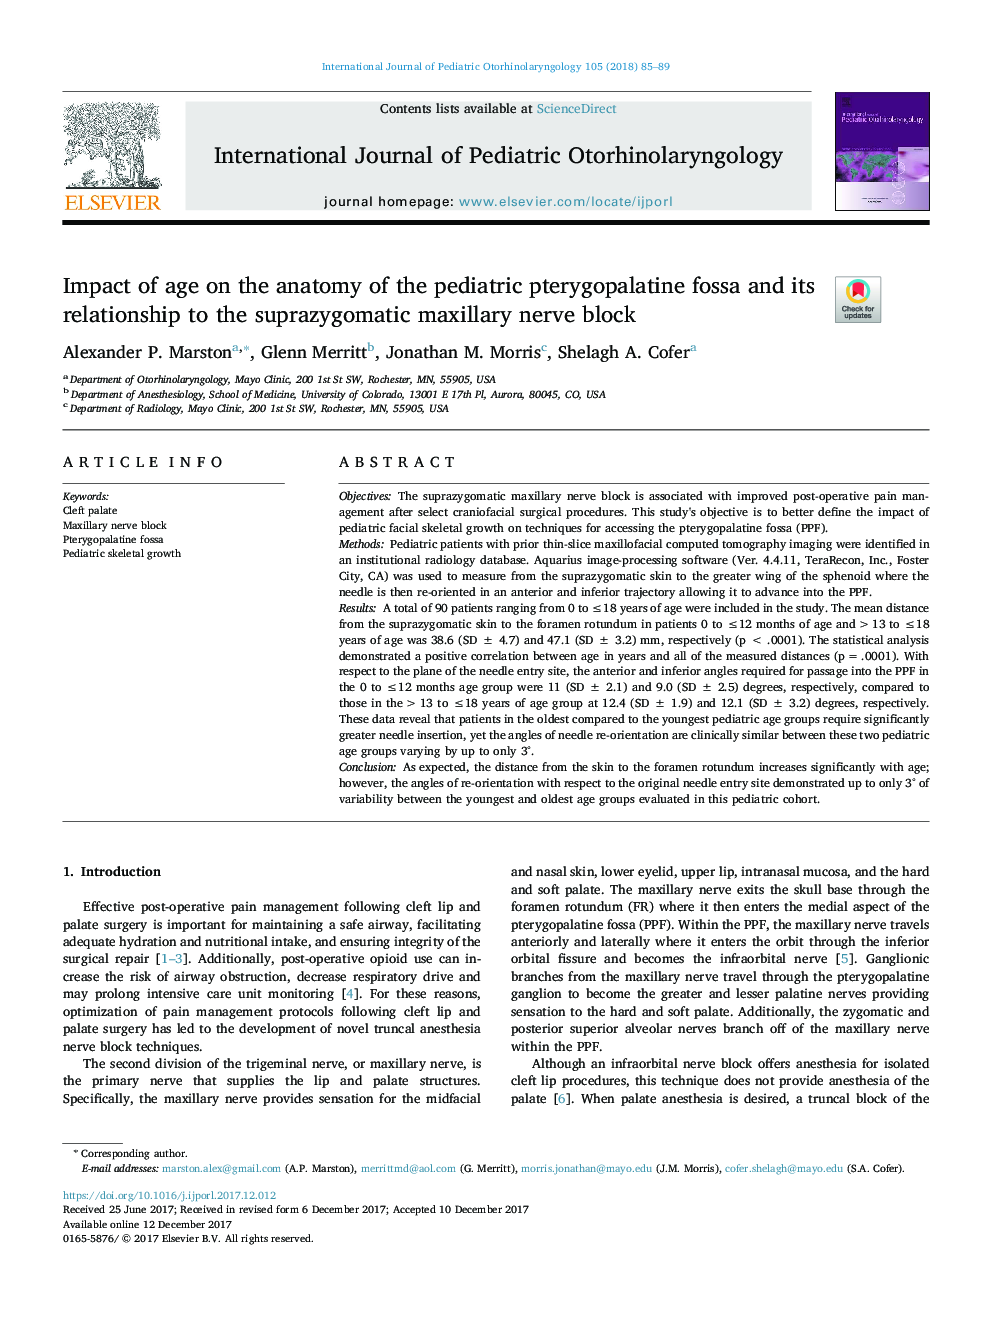 Impact of age on the anatomy of the pediatric pterygopalatine fossa and its relationship to the suprazygomatic maxillary nerve block